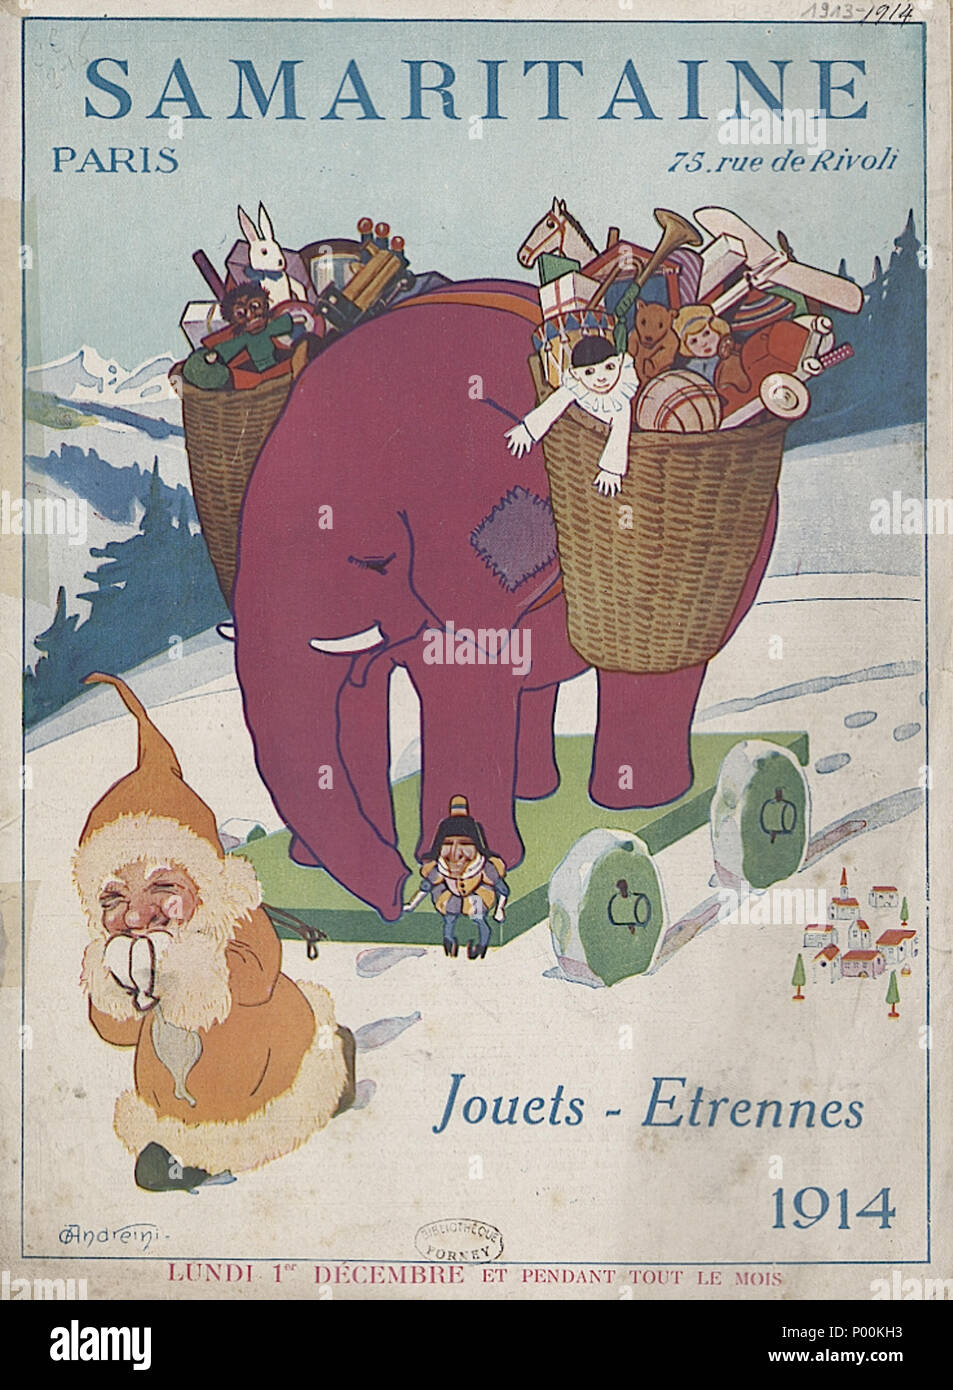 JOUETS ET ETRENNES TOYS PUPPETS CHILDREN NEW YEAR GIFTS VINTAGE POSTER REPRO